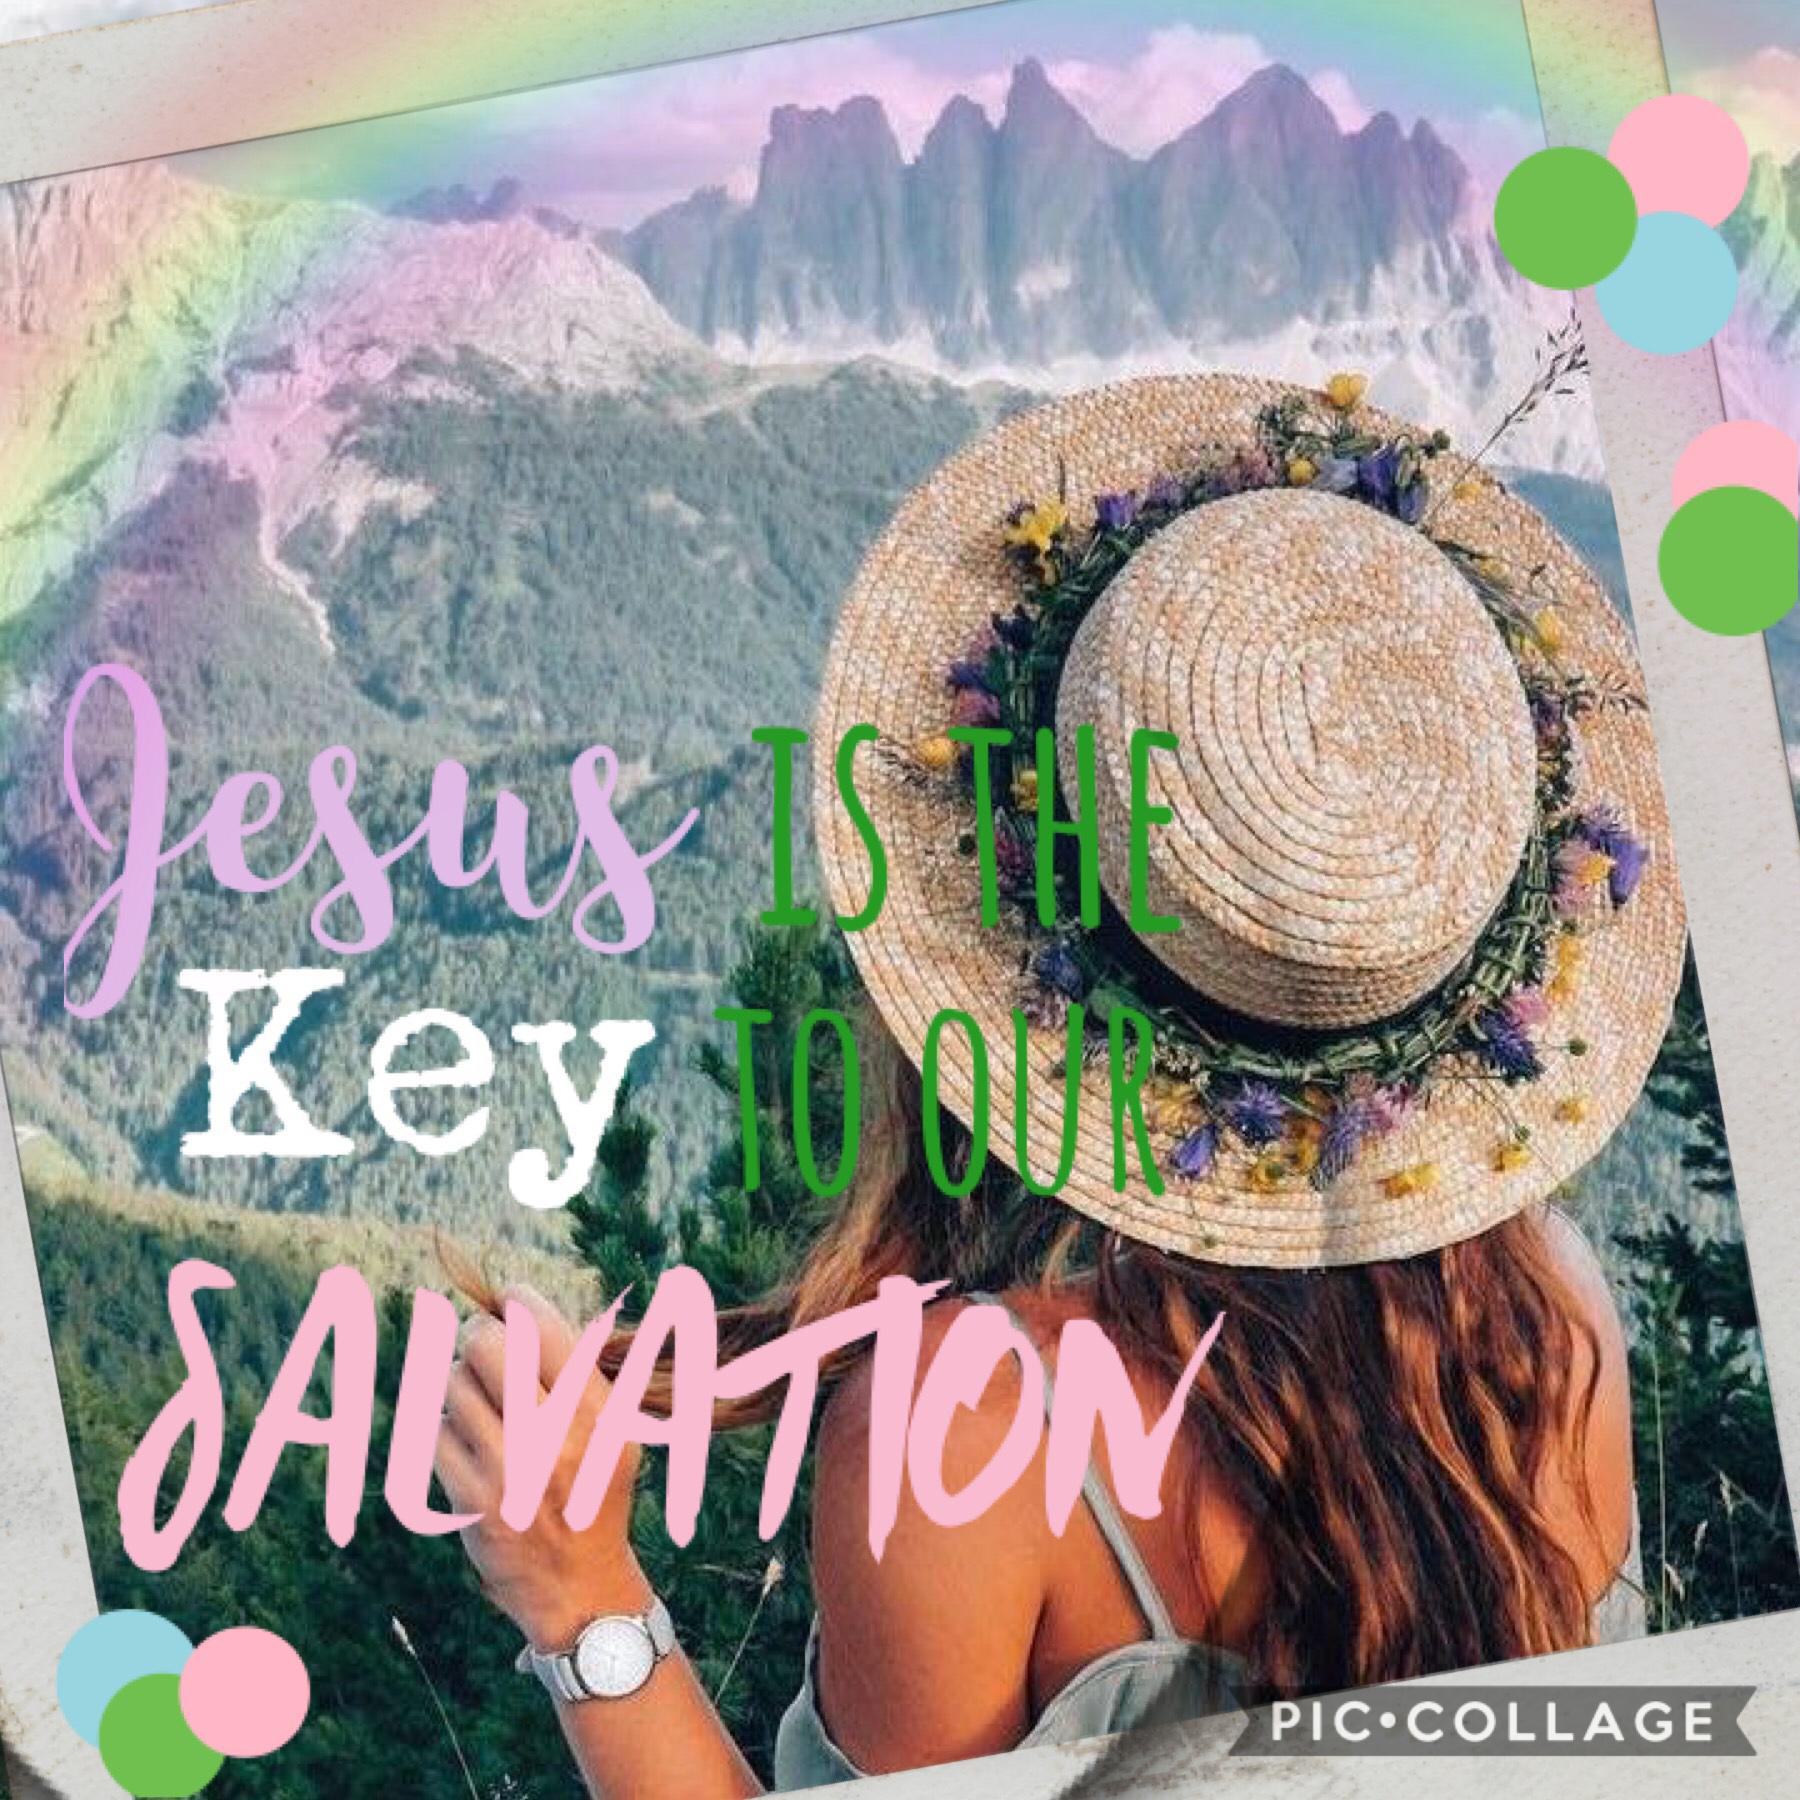 Jesus is the key to our salvation 